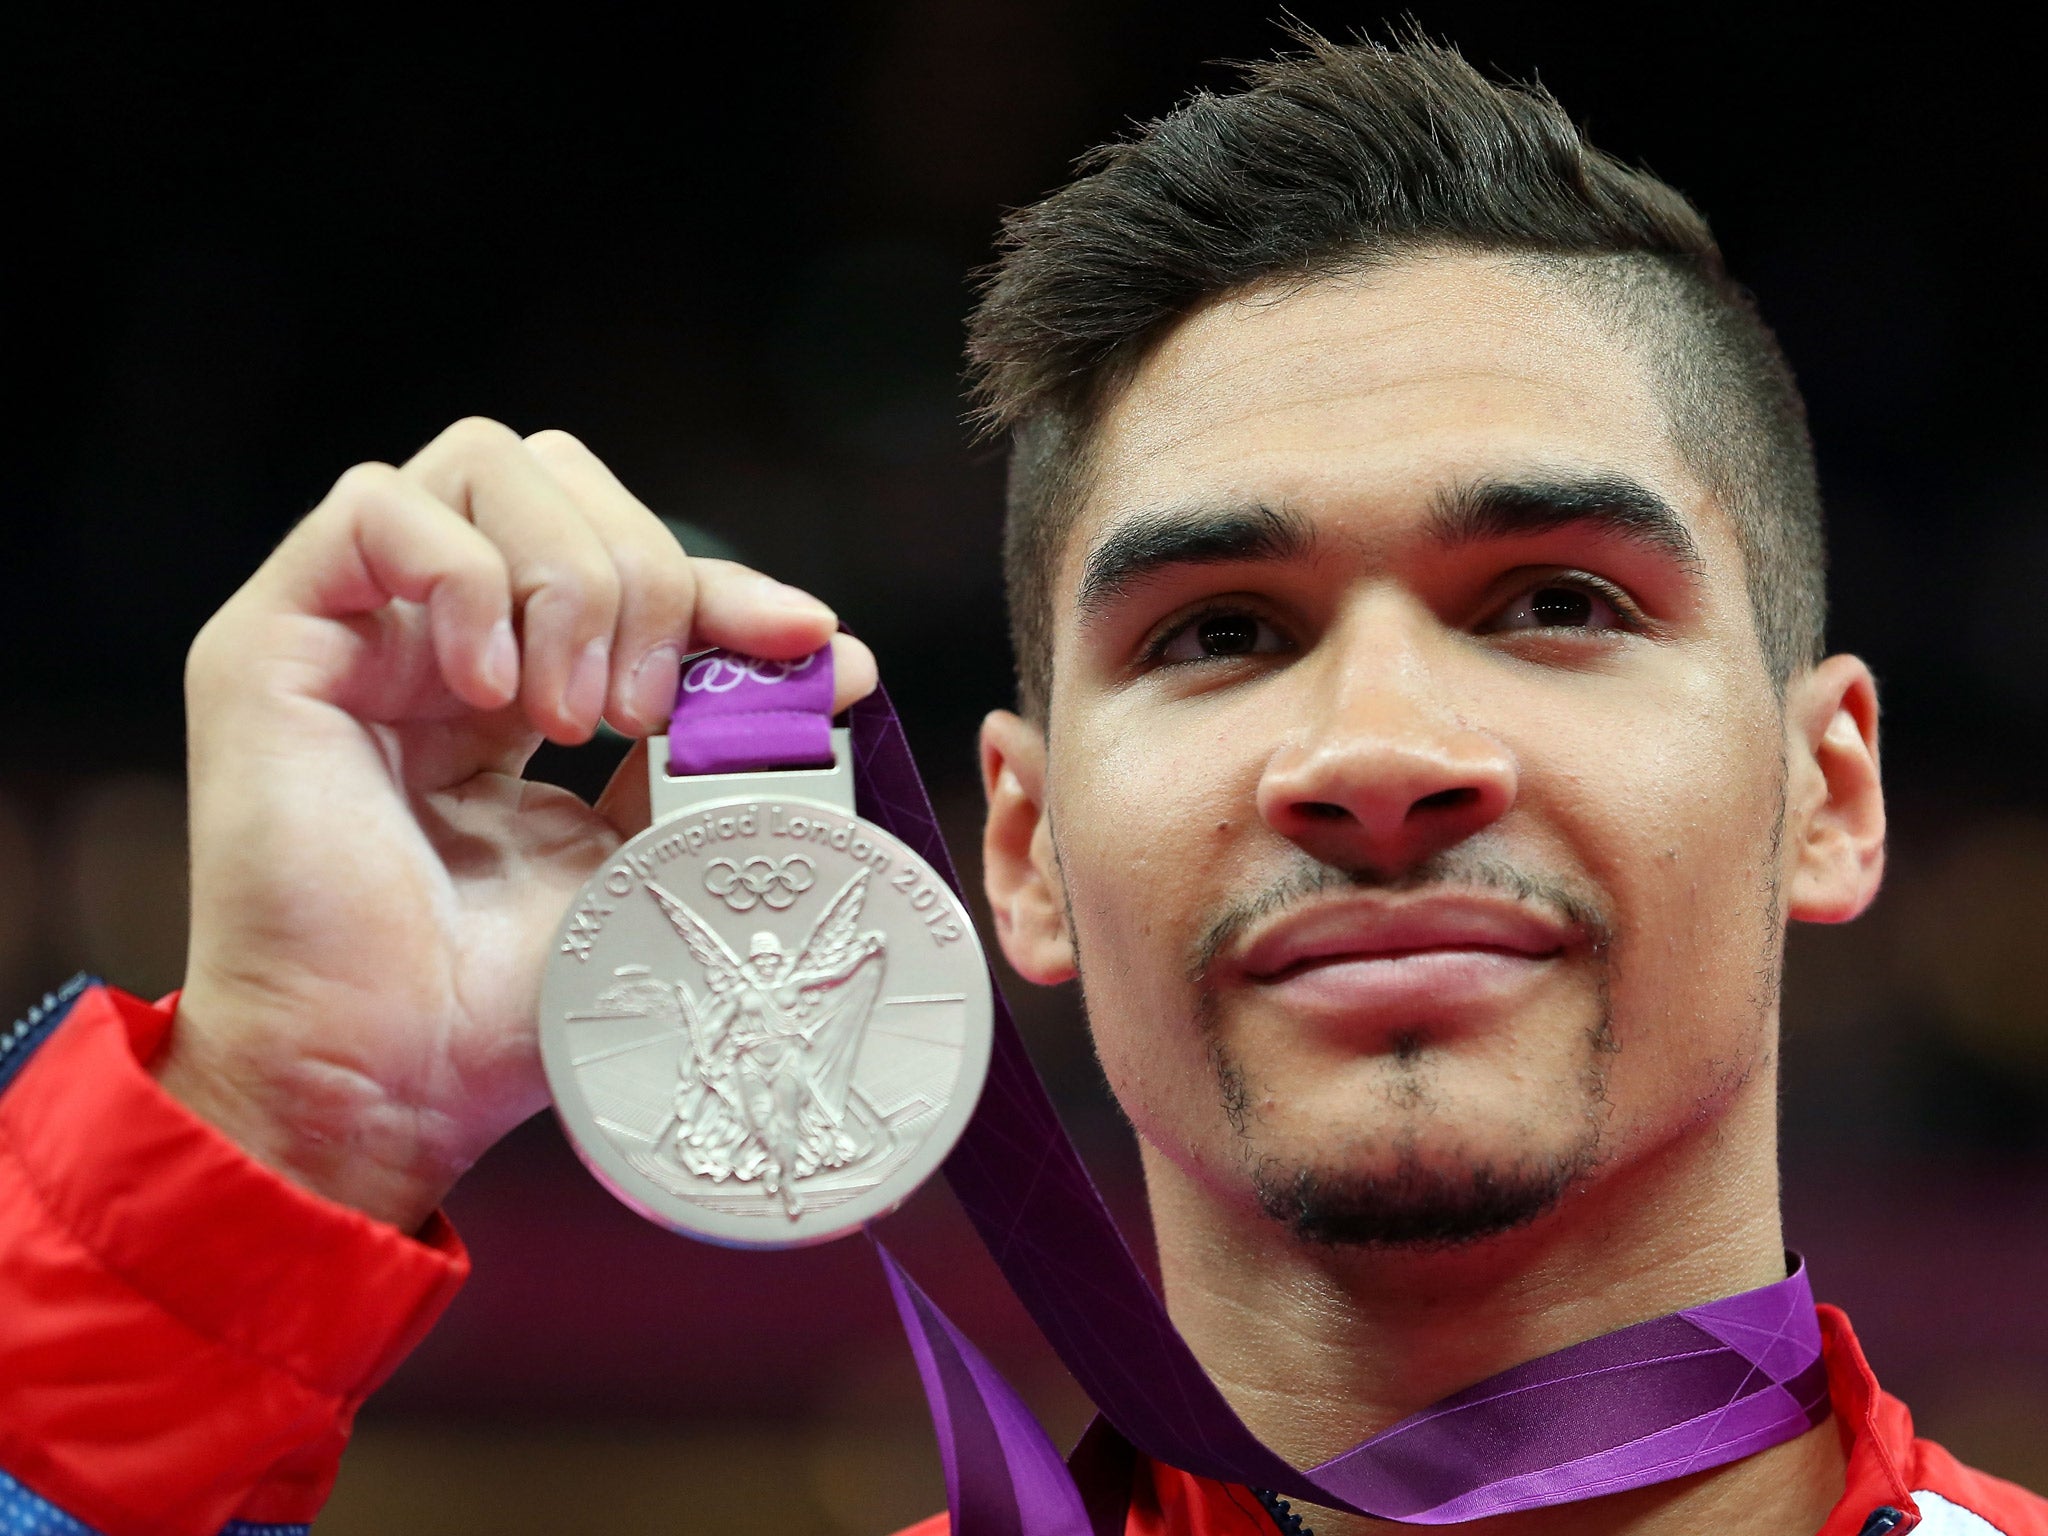 Gymnastics: Louis Smith performs back-flip on retirement plans | The Independent